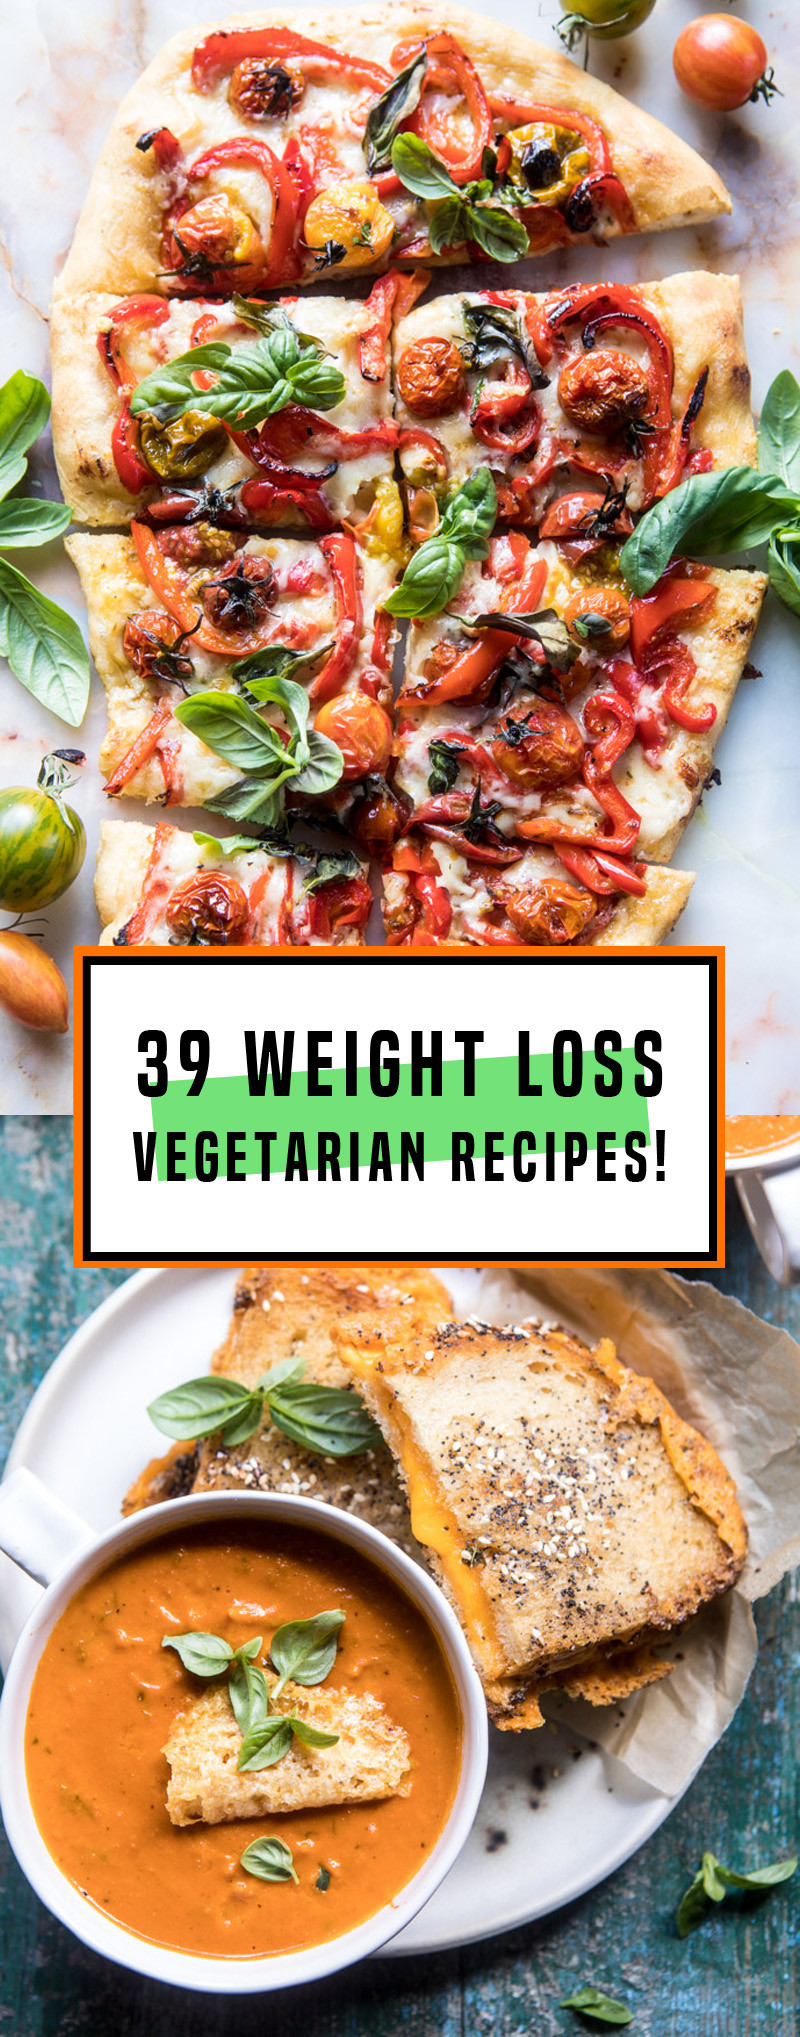 Weight Loss Vegetarian Recipes
 39 Ve arian Weight Loss Recipes That Are Healthy And